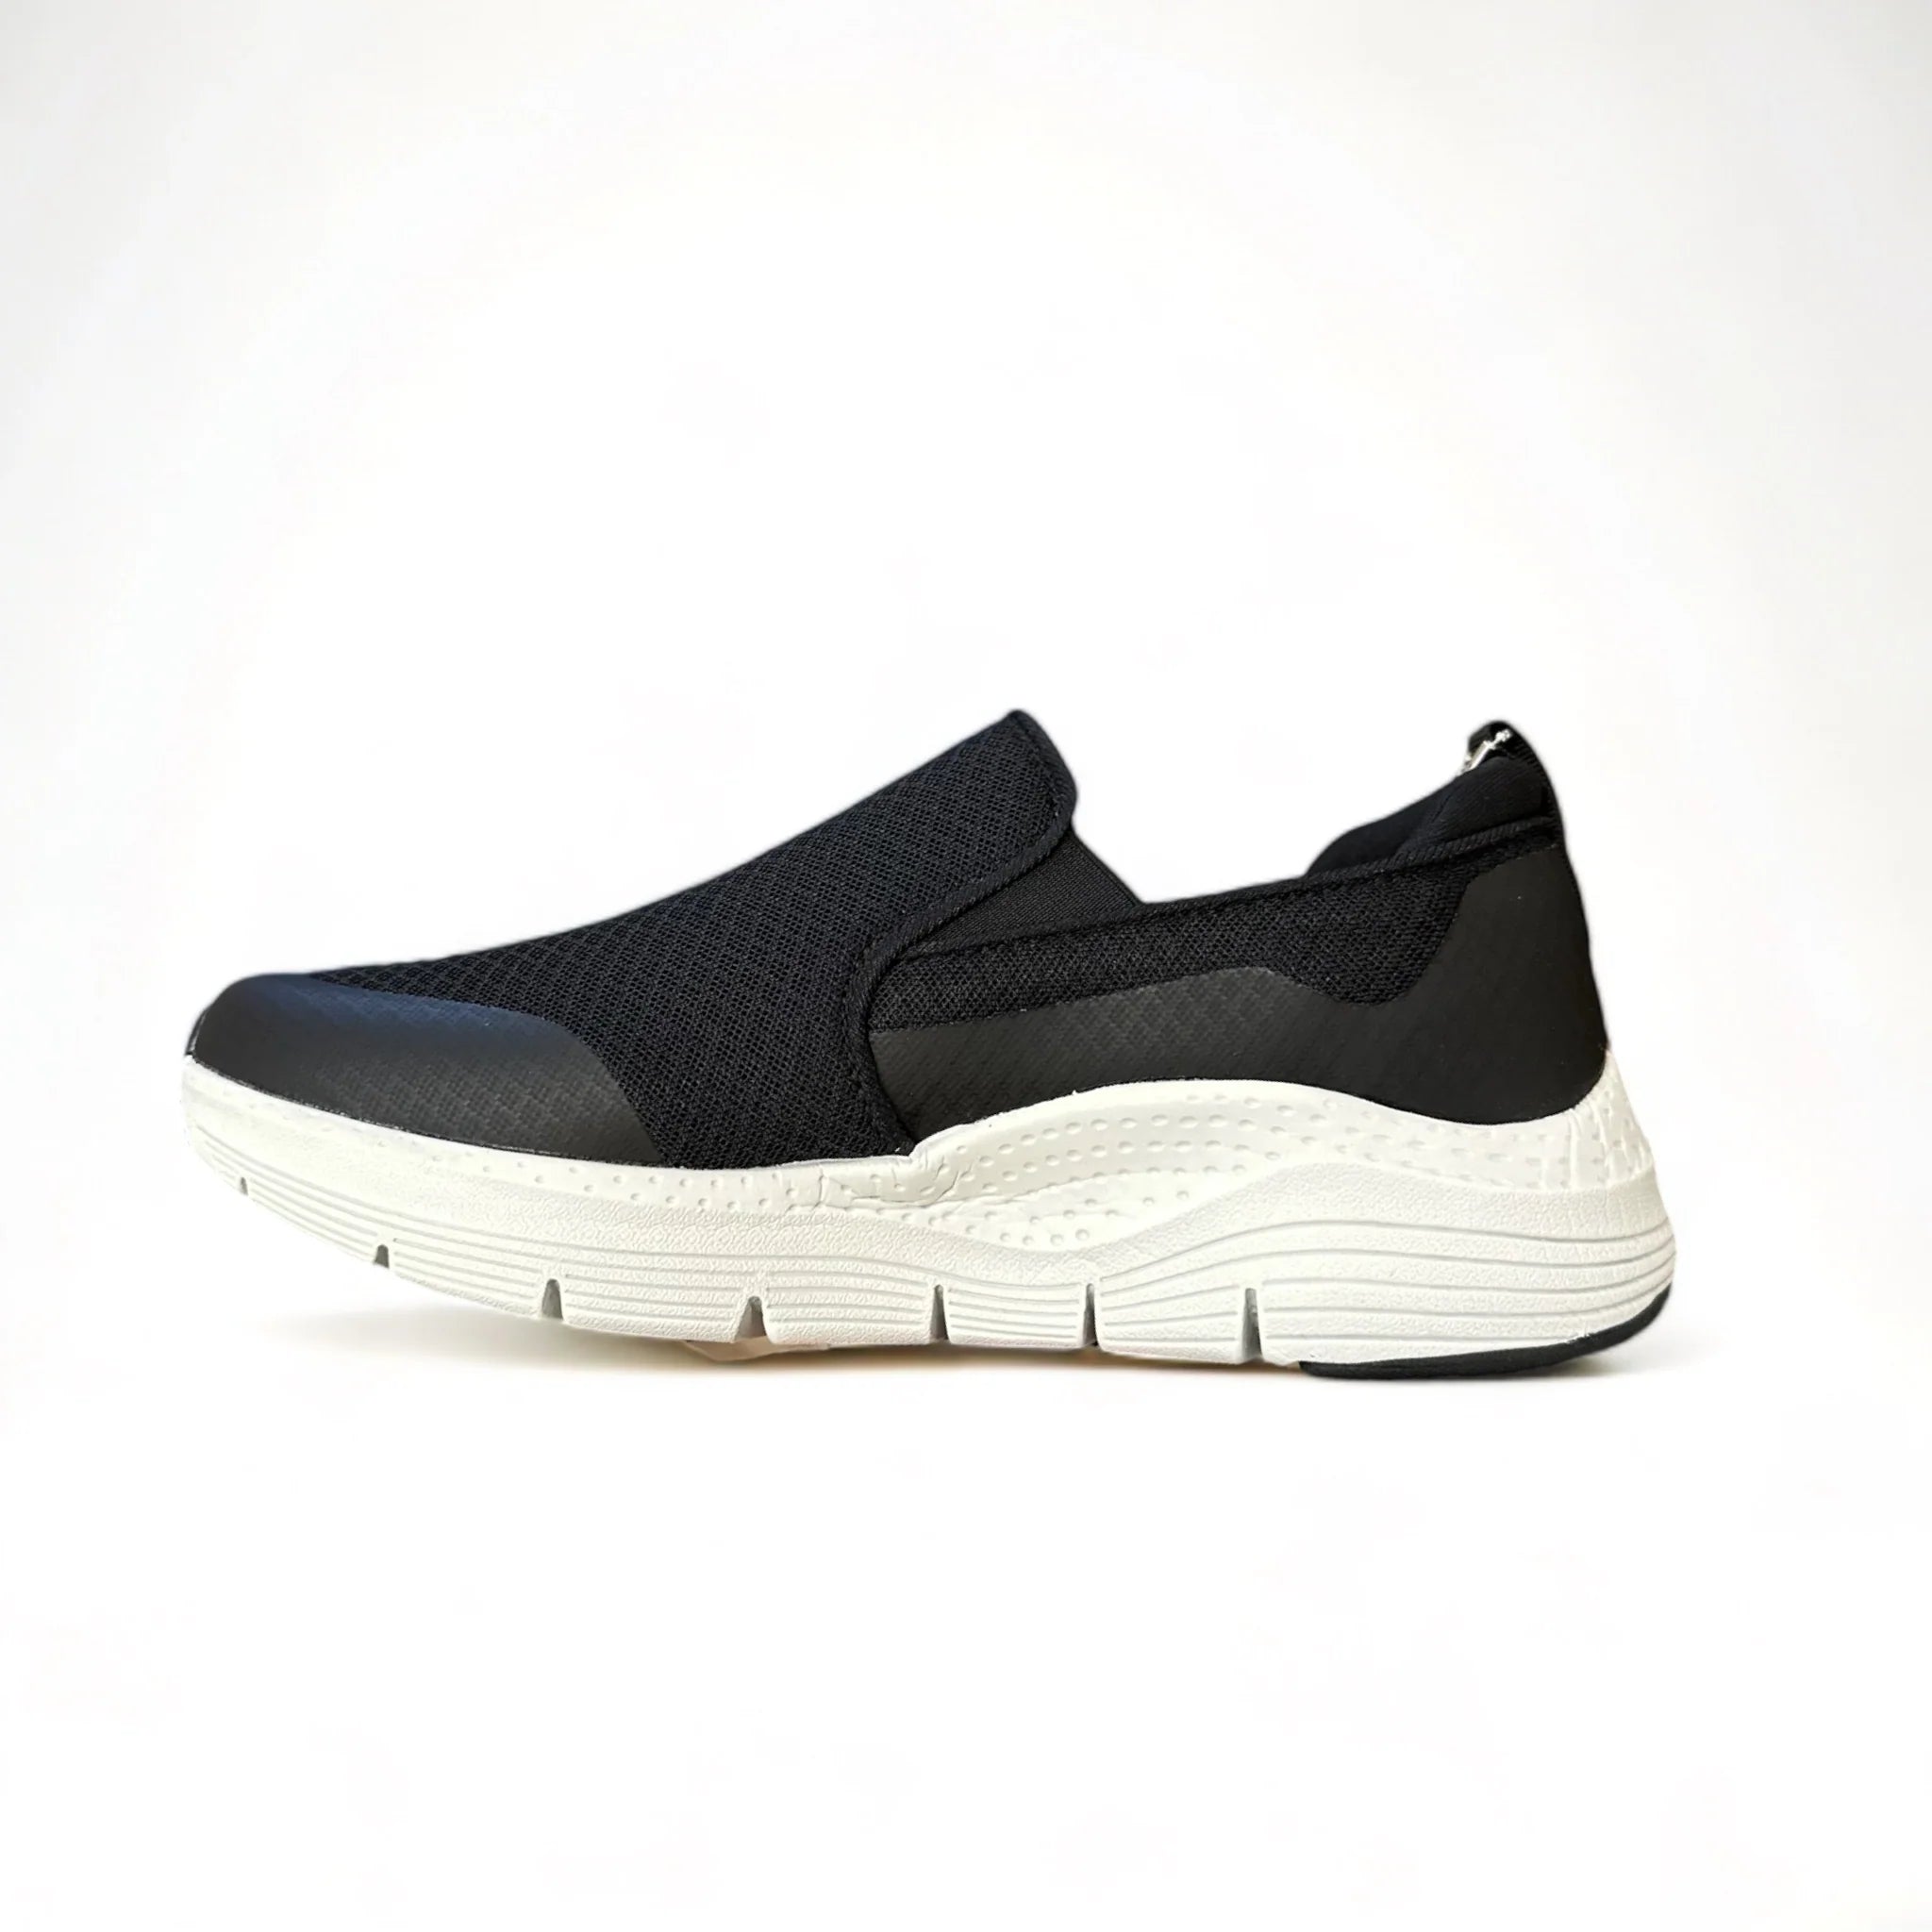 Skechers Arch Fit Black & White